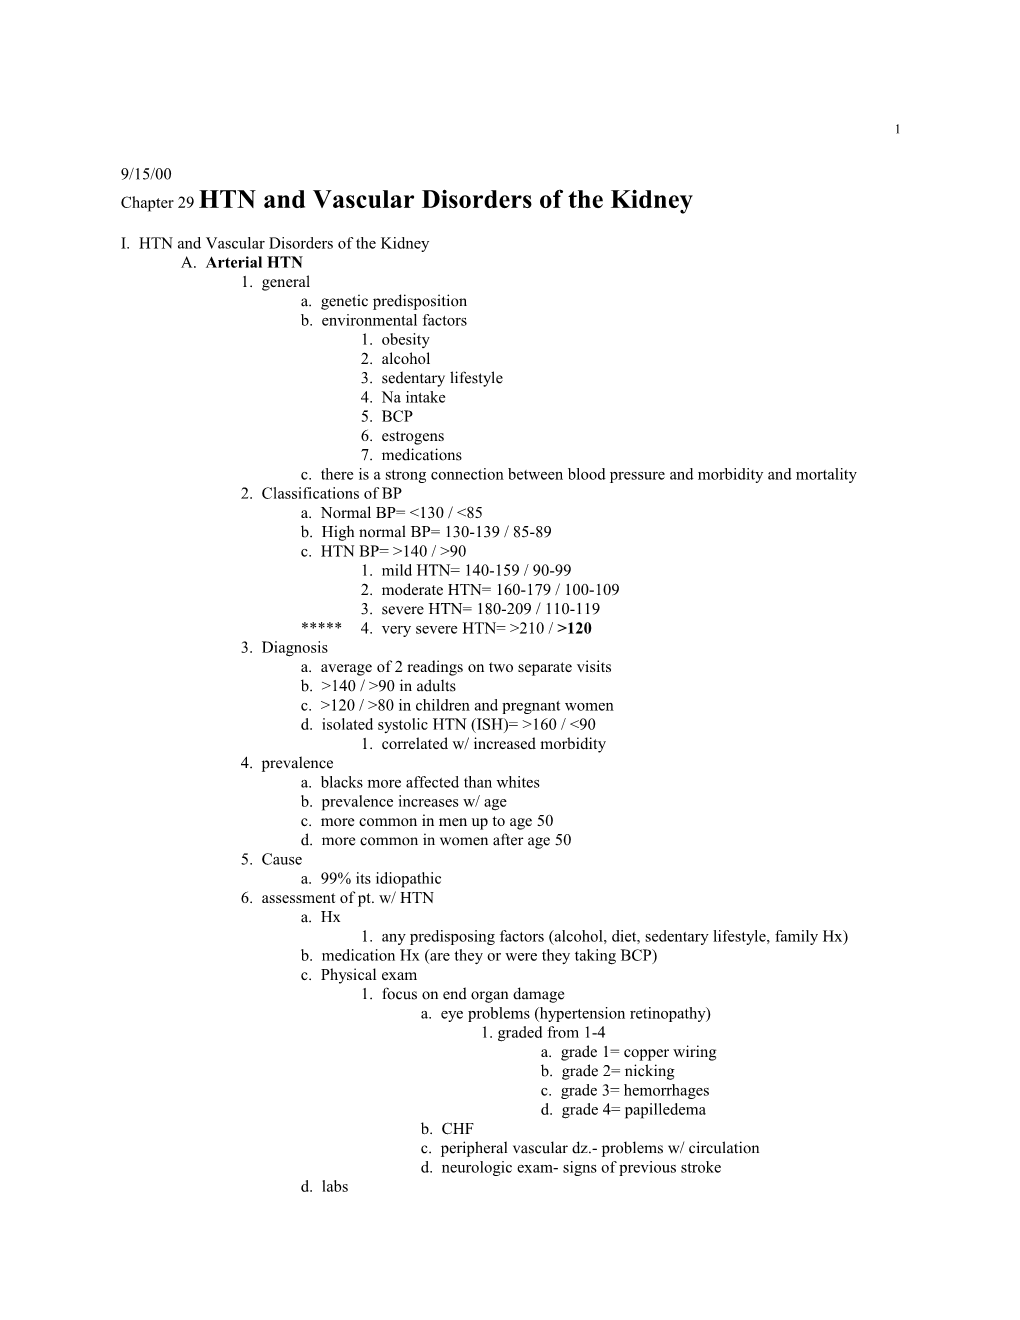 Chapter 29 HTN and Vascular Disorders of the Kidney